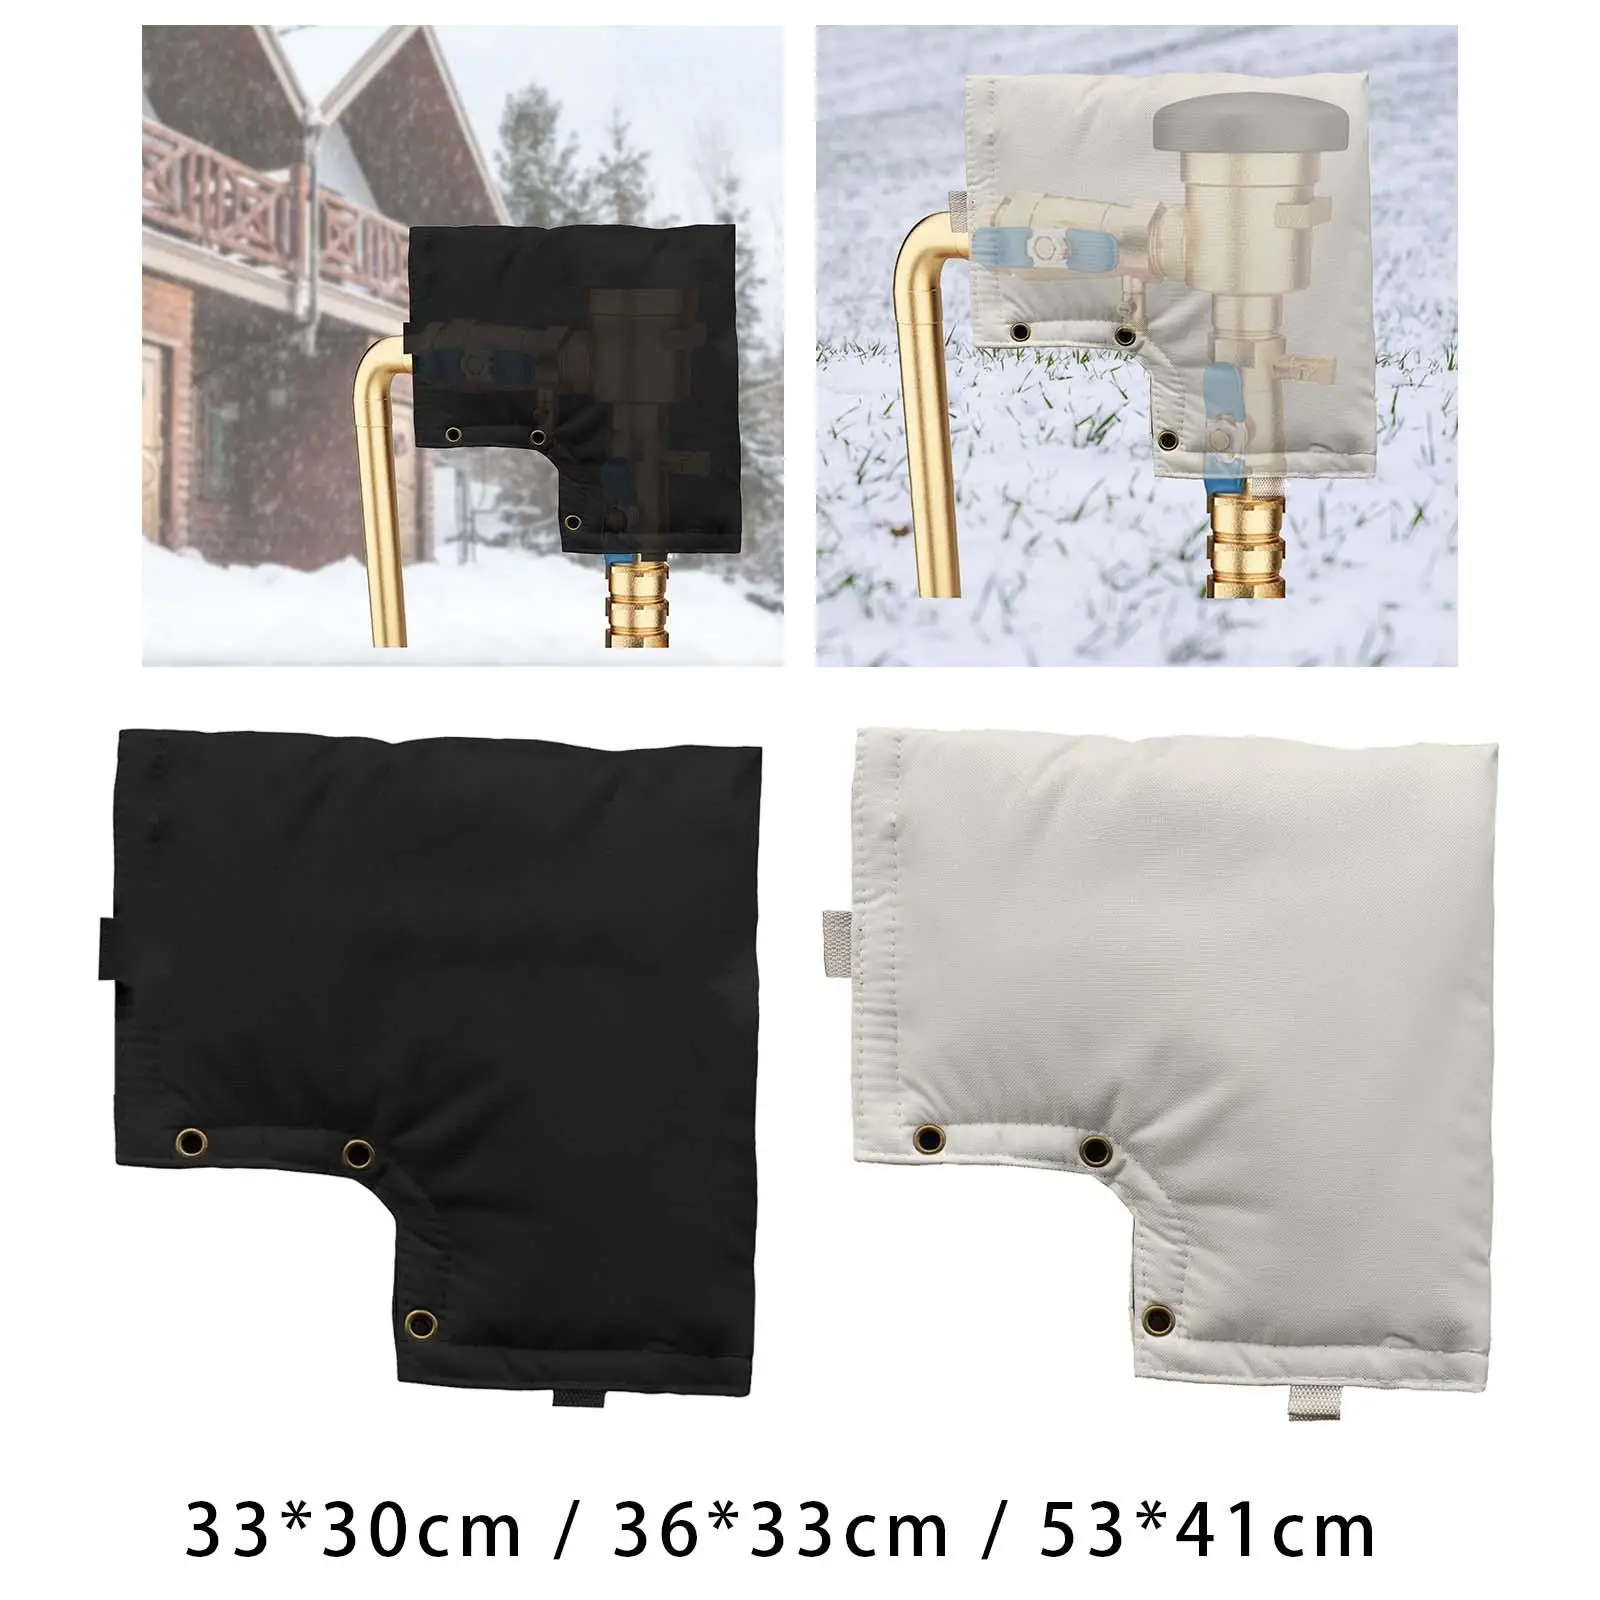 Backflow Preventer Cover Insulated for Winter Pipe Freeze Protection Faucet Covers Water Pump Covers Winter Head Cover